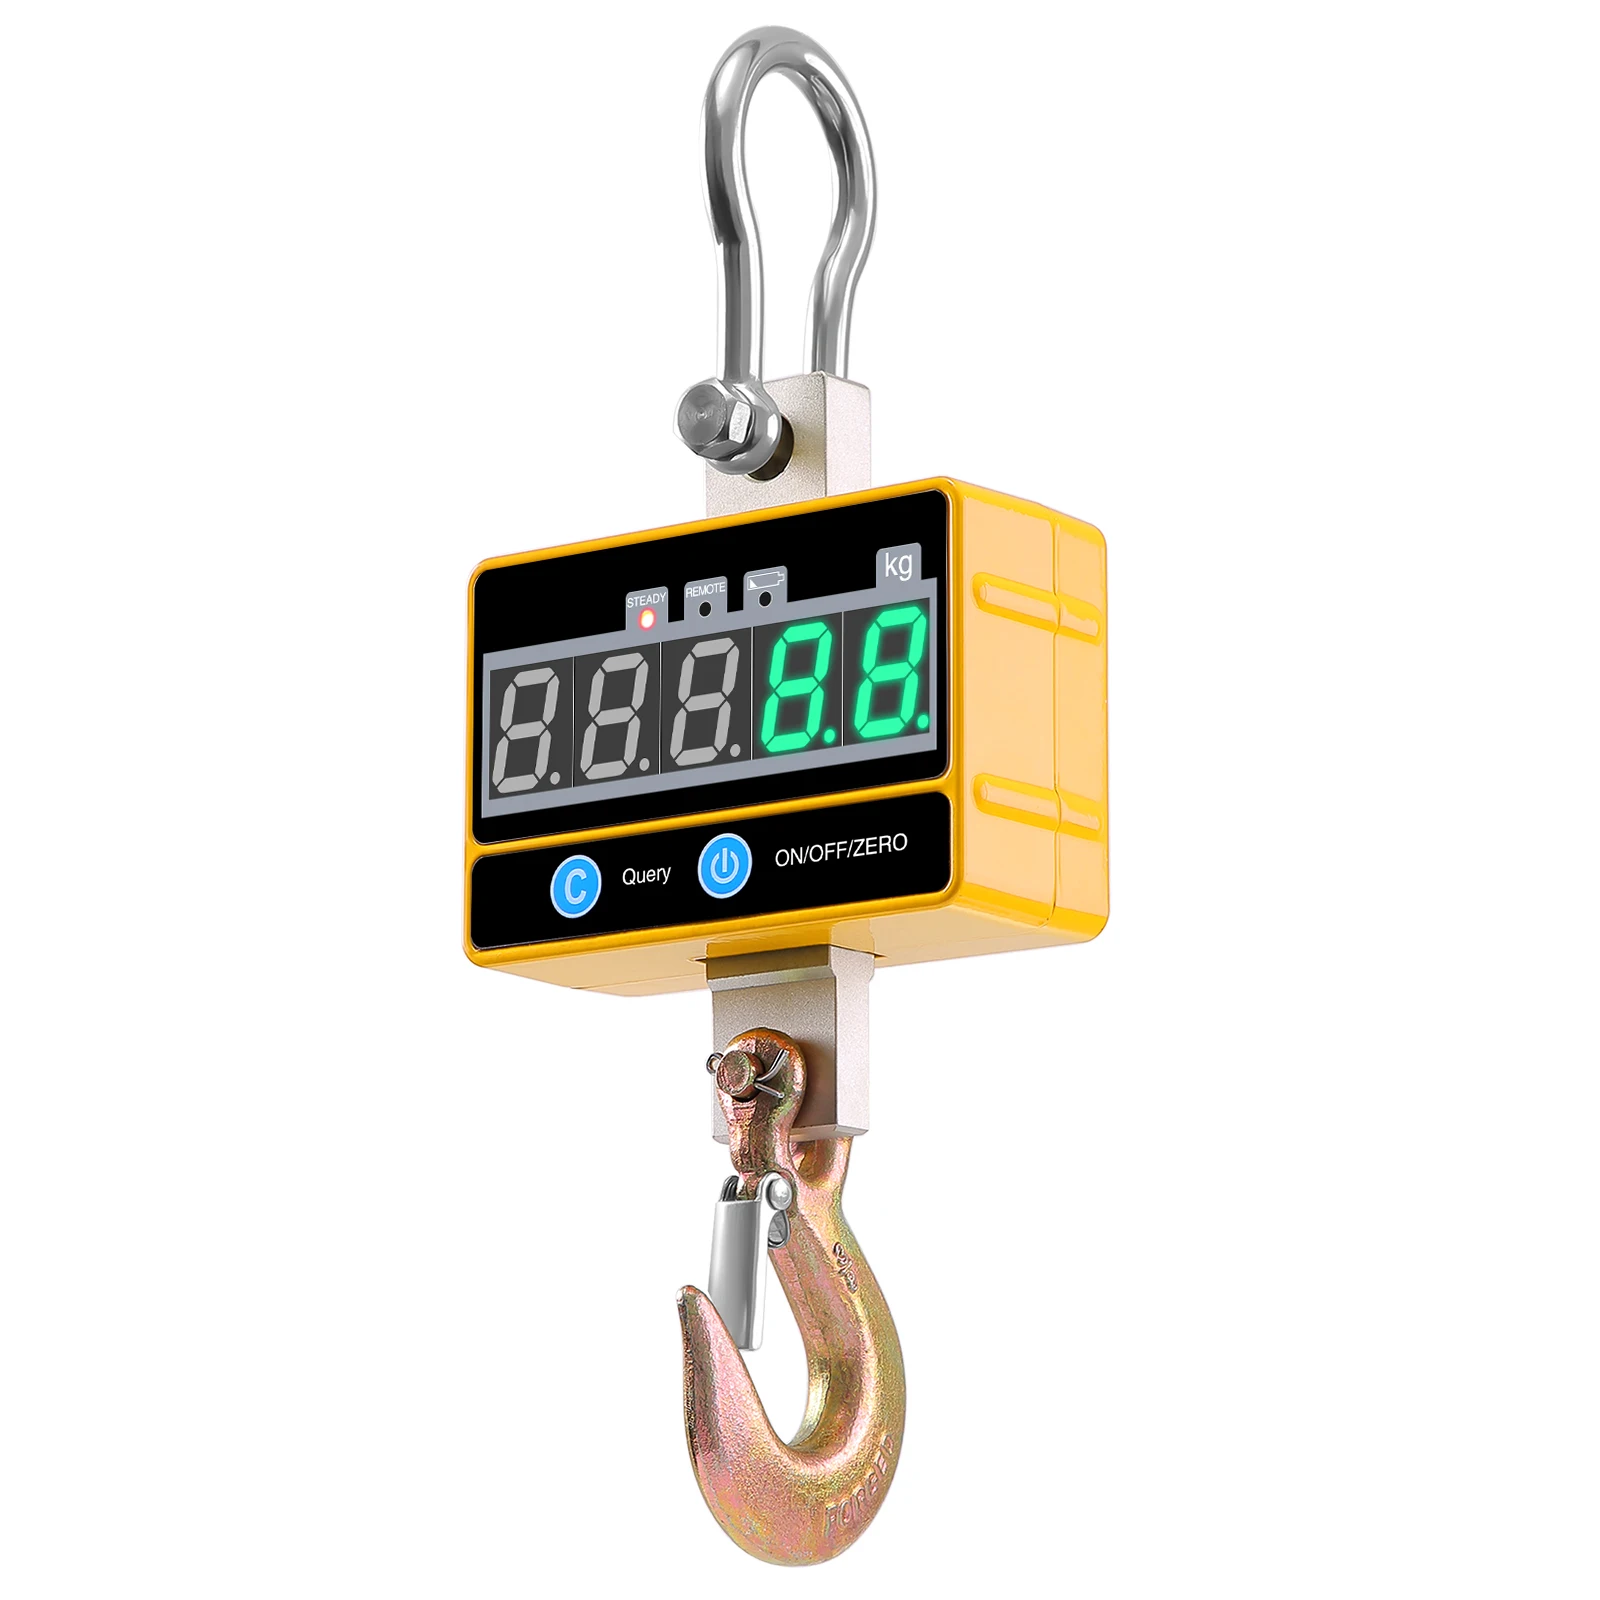 

OCS-SE Super Clear Digital Crane Scale 1000kg/2000lb Industrial Heavy Duty Hanging Scale Rechargeable with Remote Control